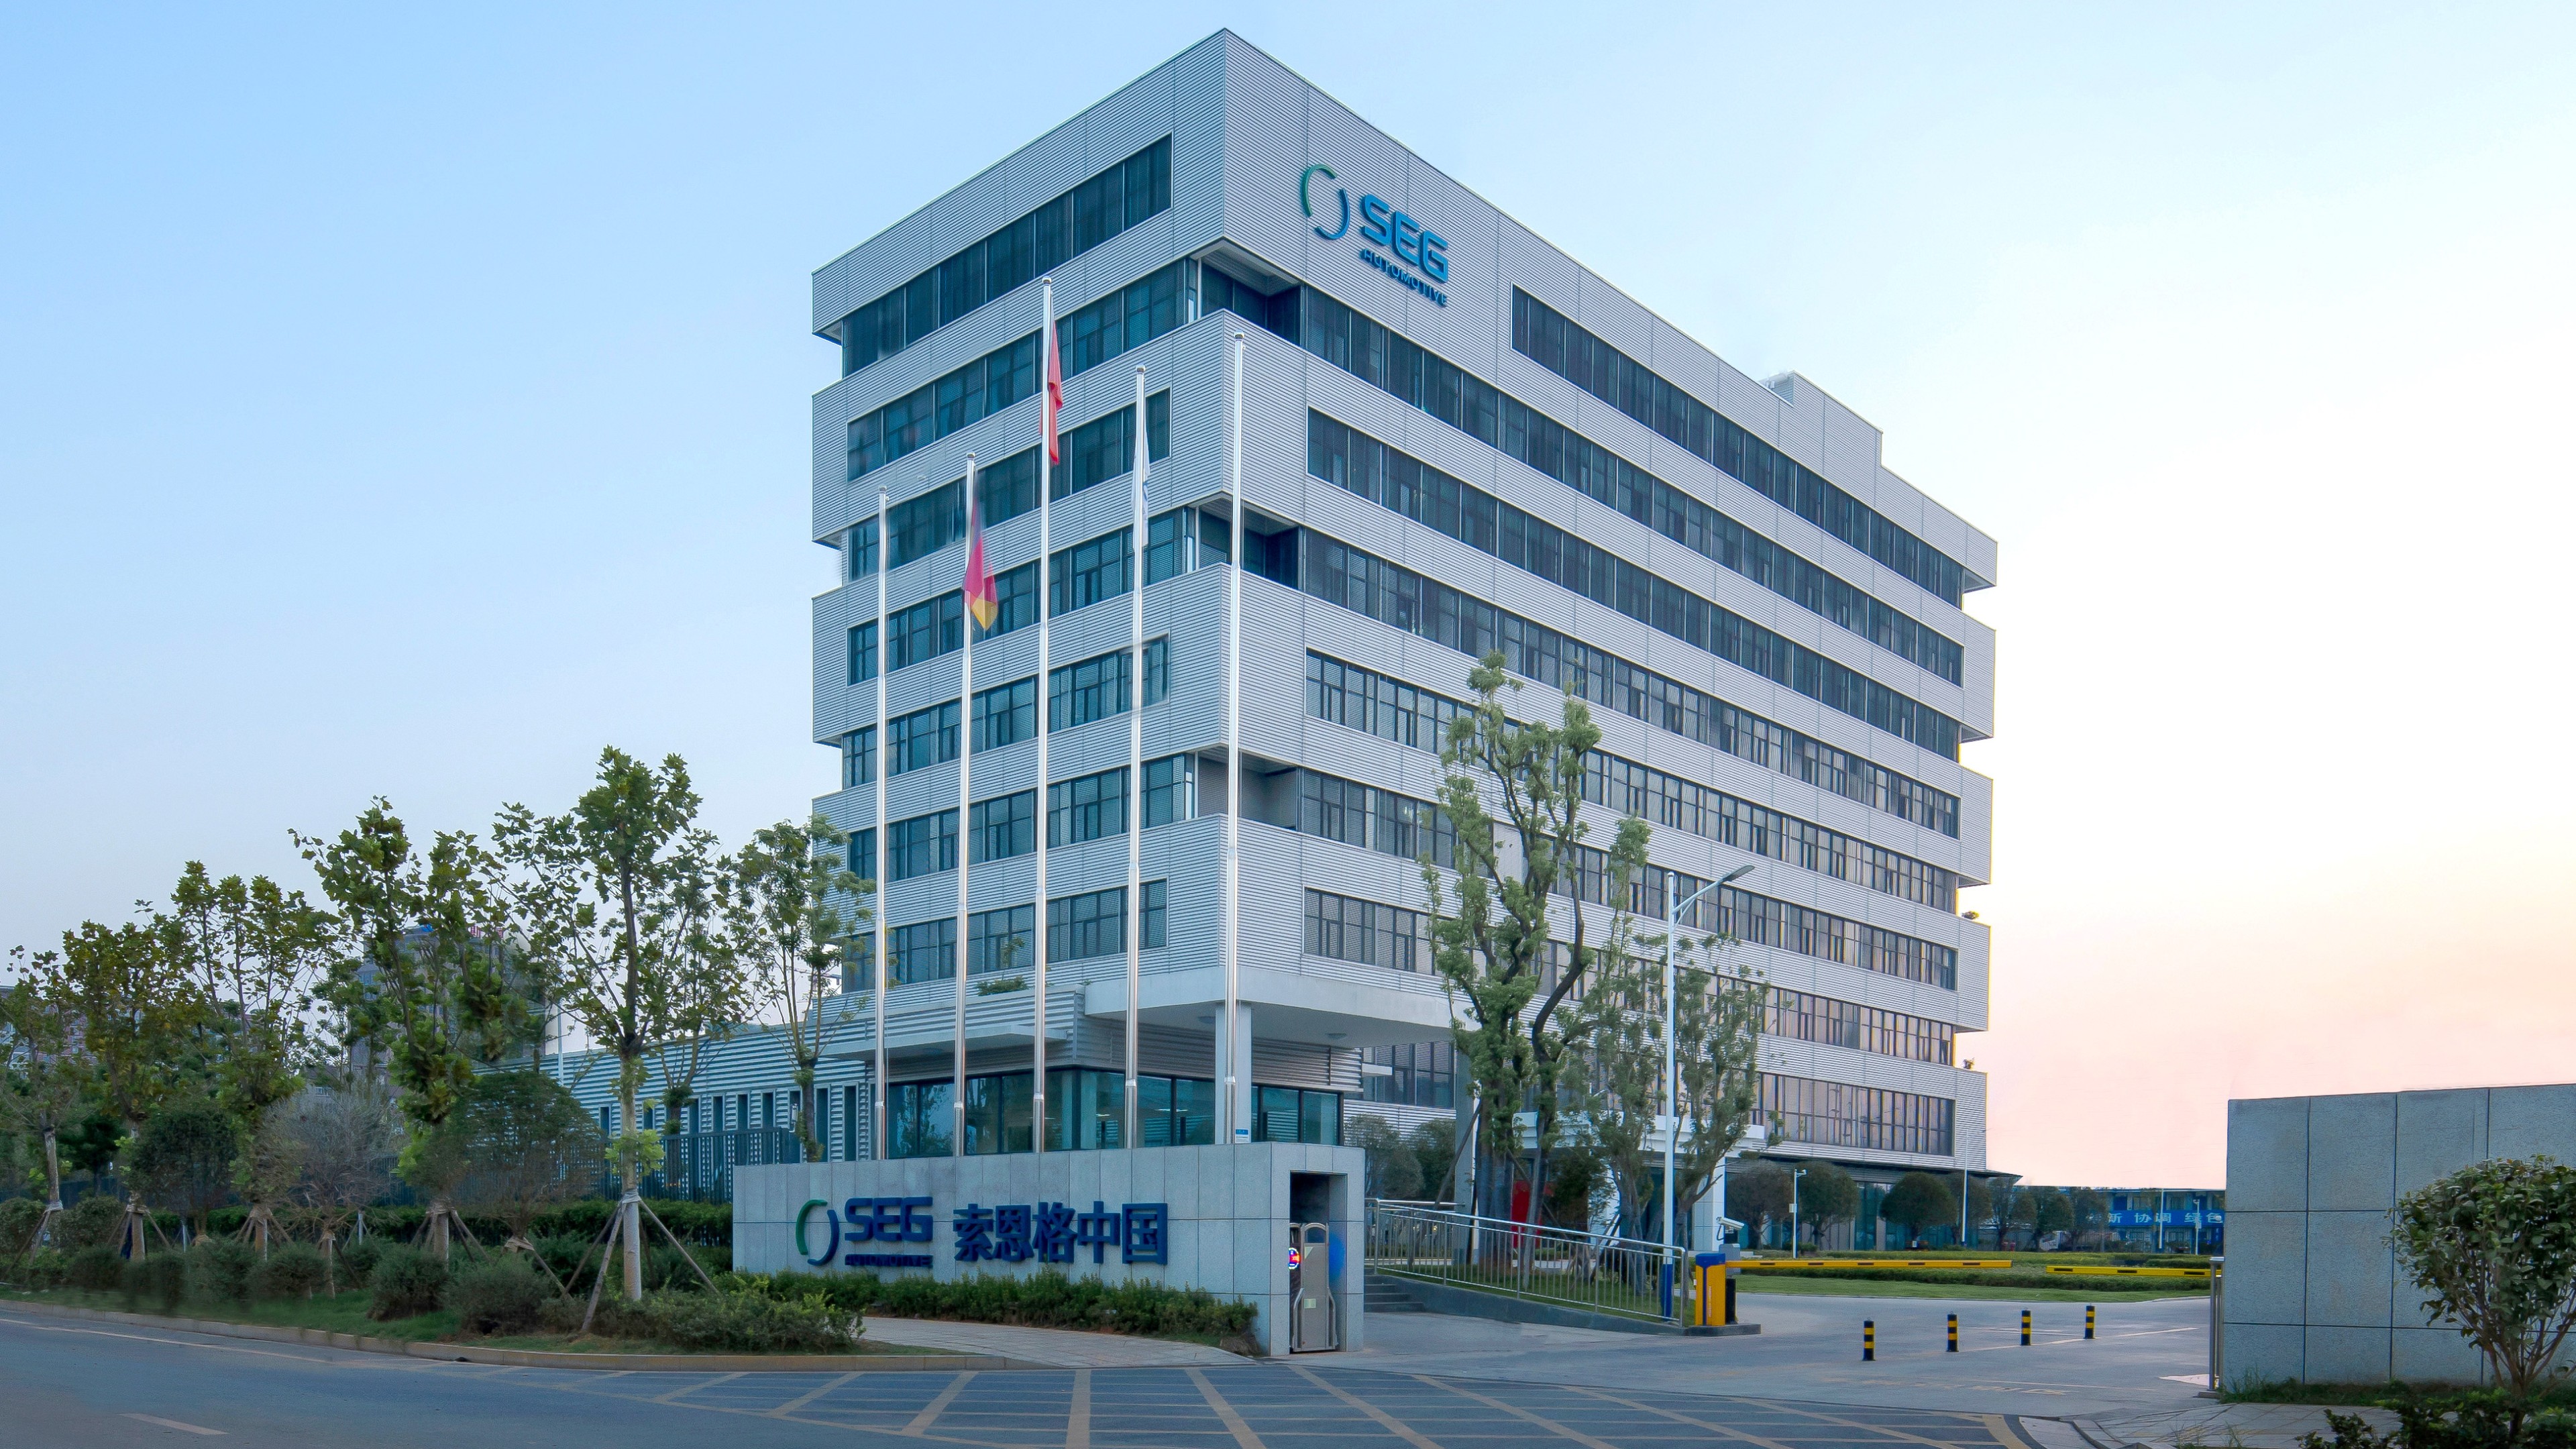 Gate and Administration building of the SEG Automotive plant at the Changsha site, China